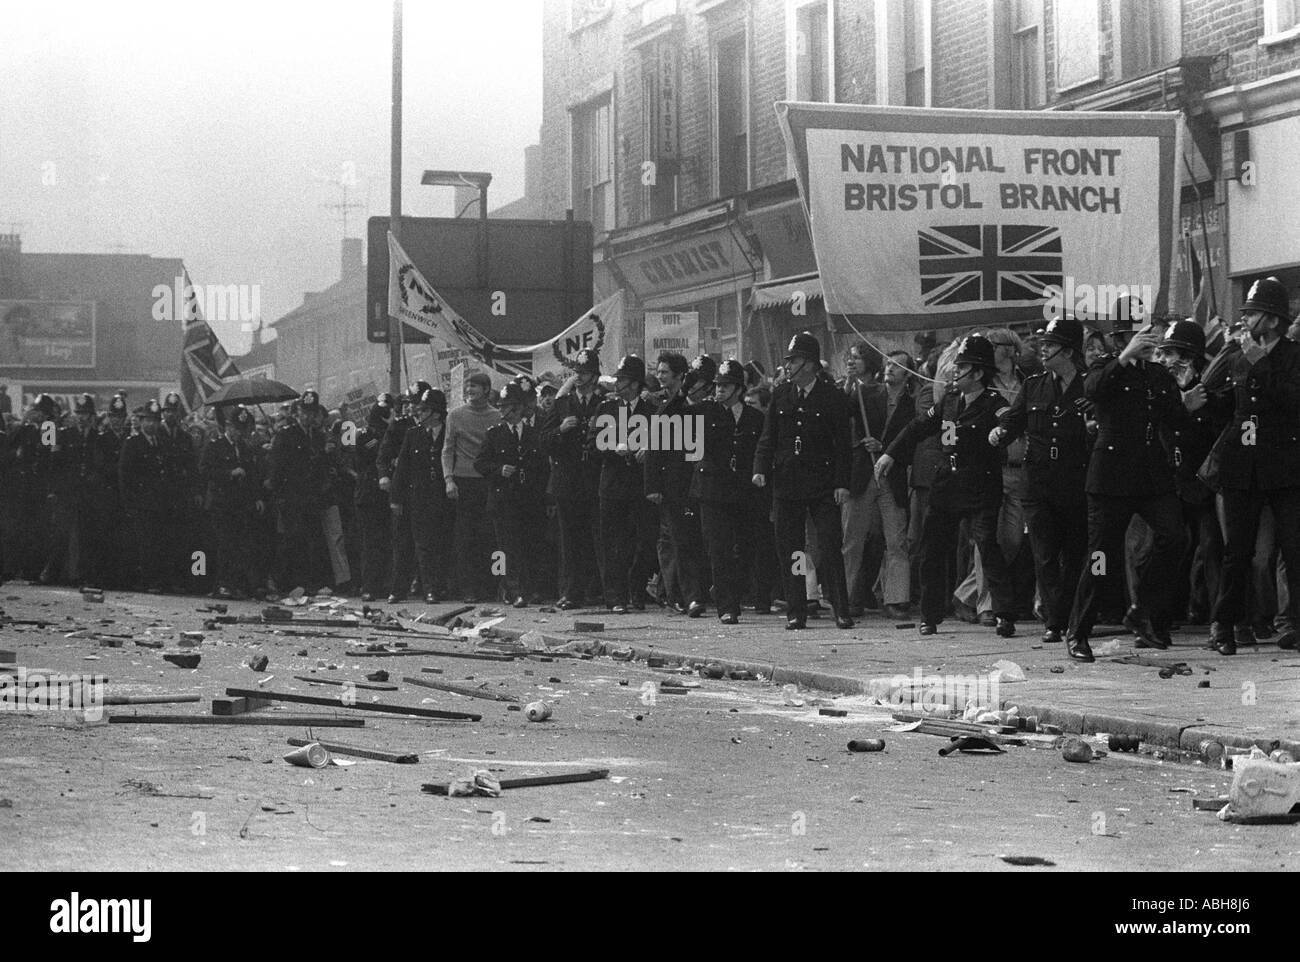 National front march uk 1970s hires stock photography and images Alamy